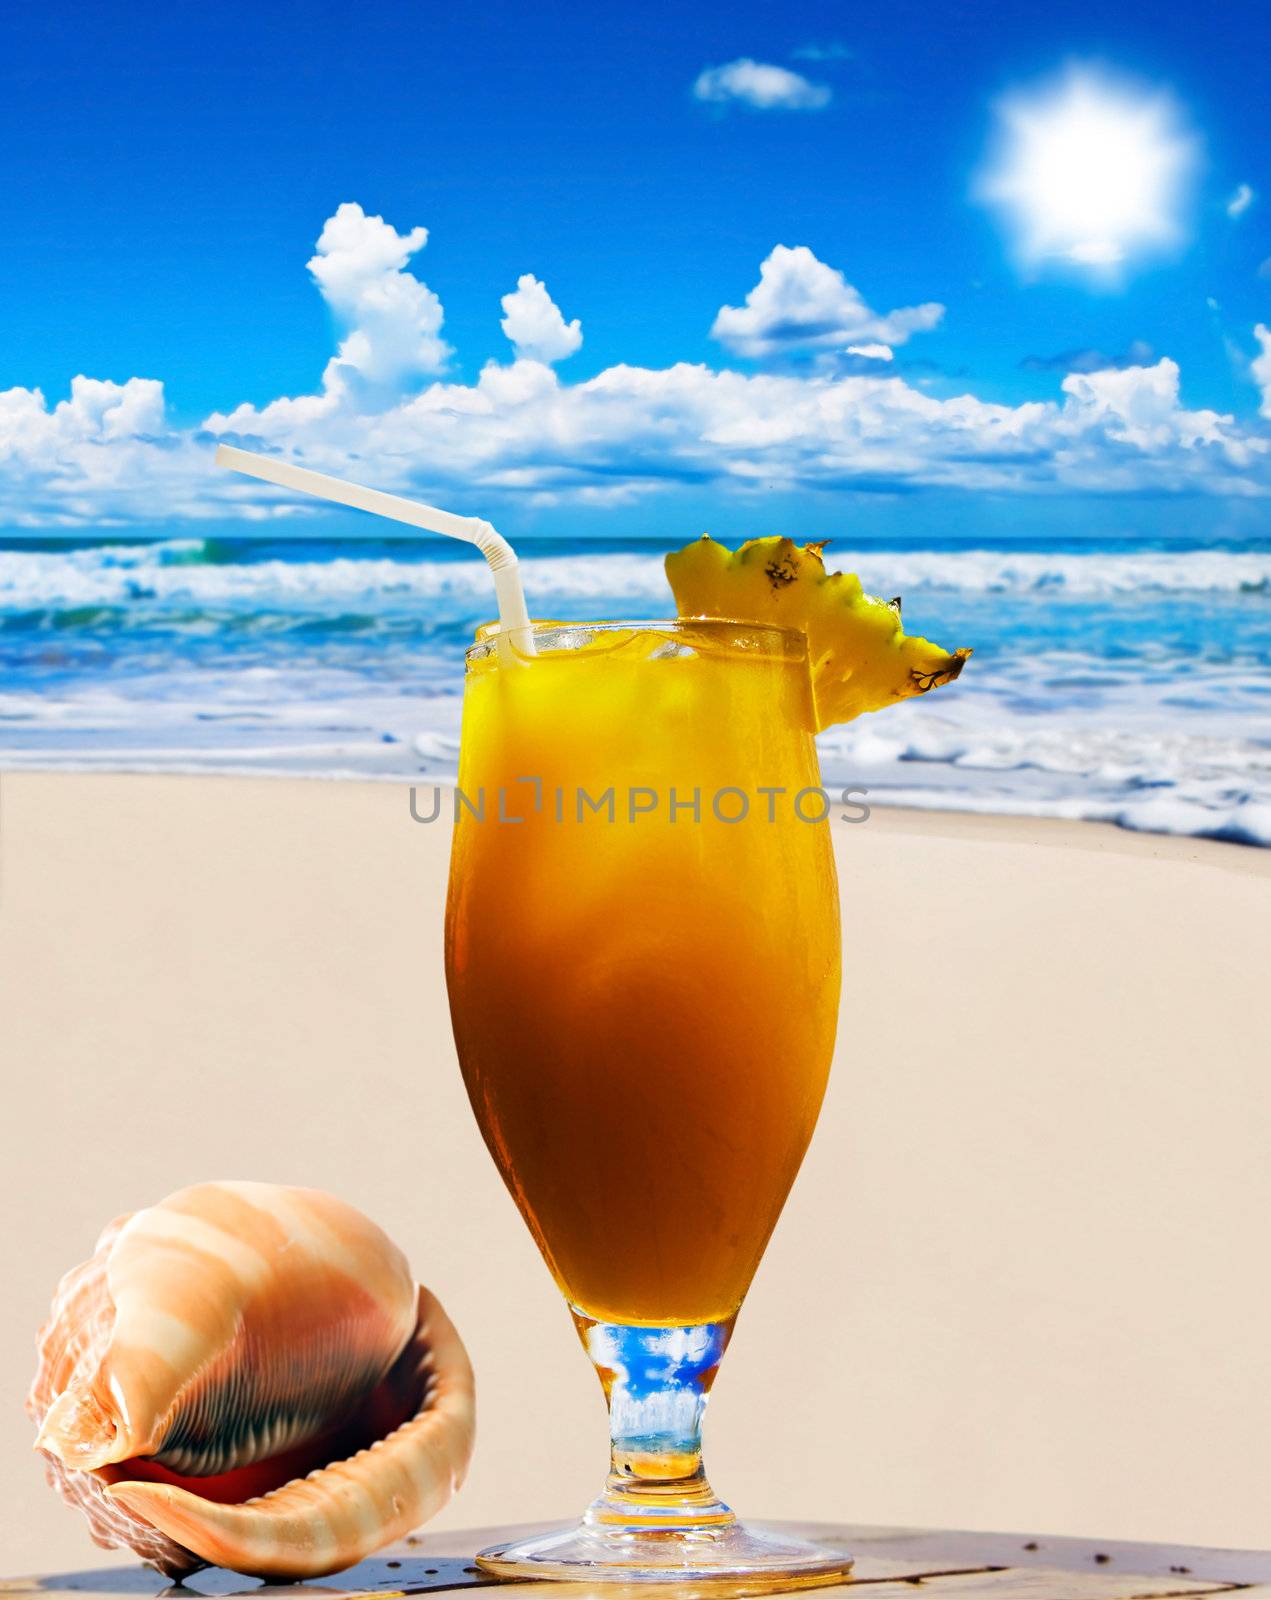 Tropical fruit cocktail and sea shell